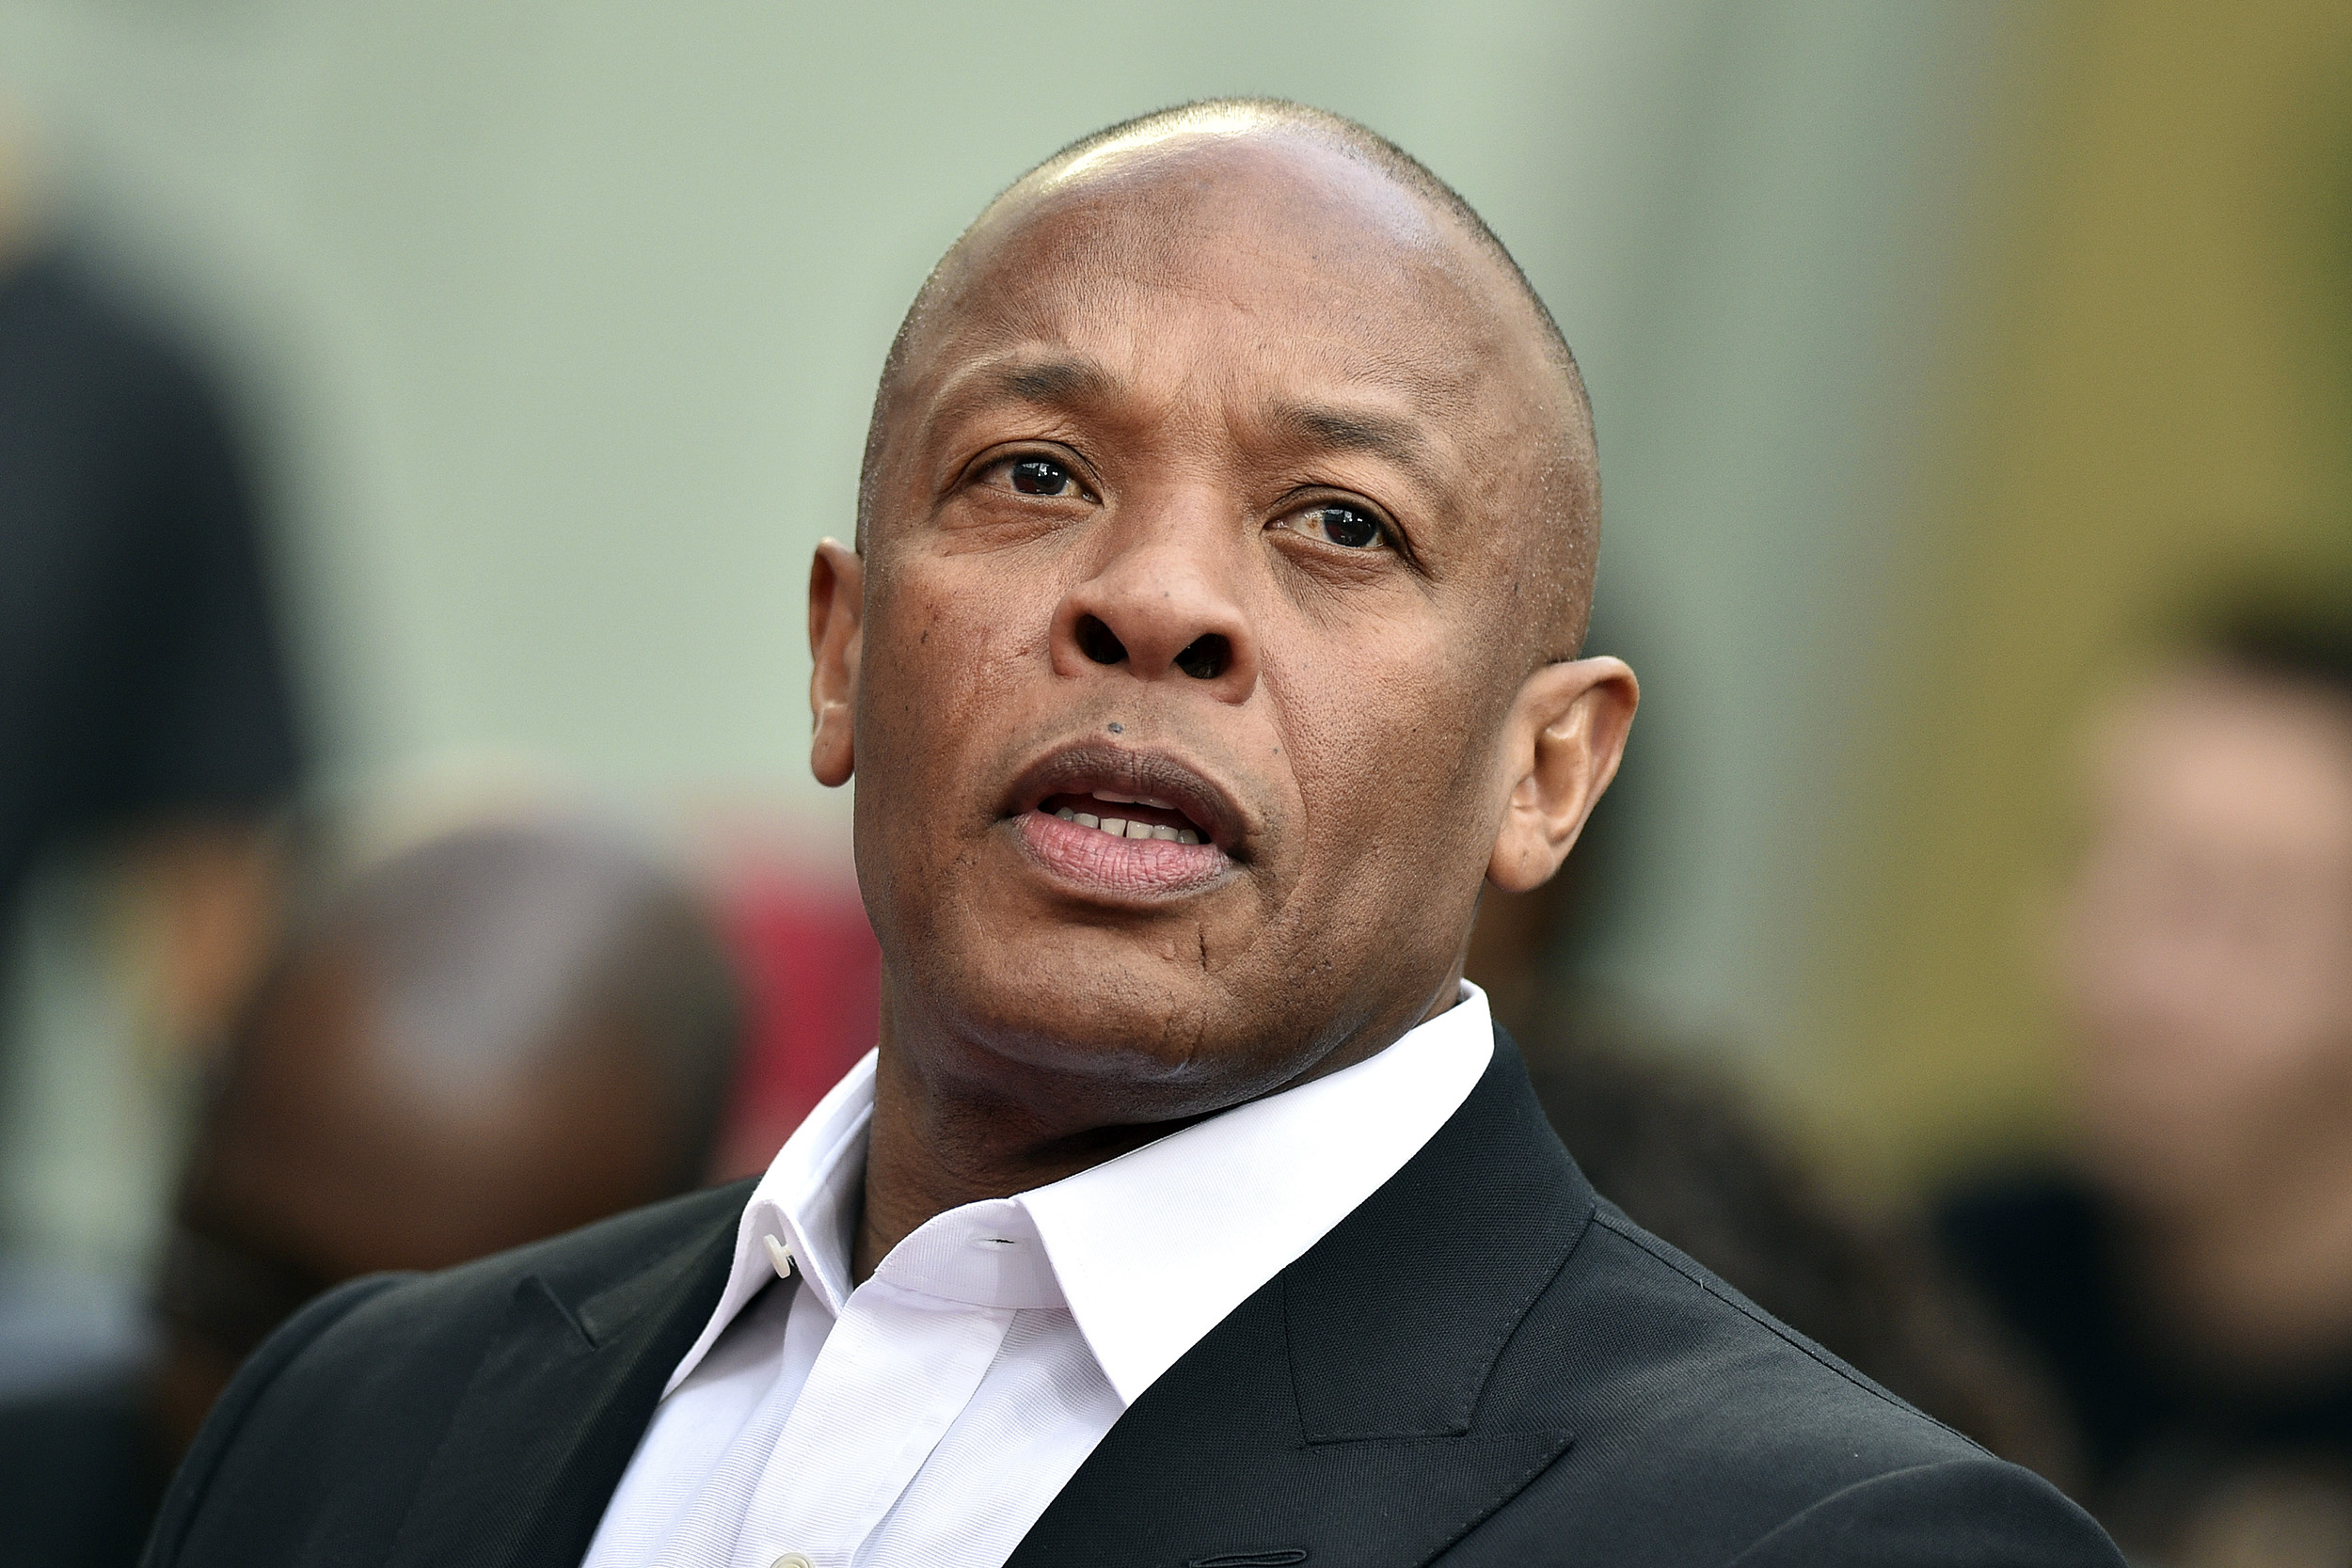 celebrities who committed crimes - Dr. Dre's history of abuse is often overlooked and people just admire his money.